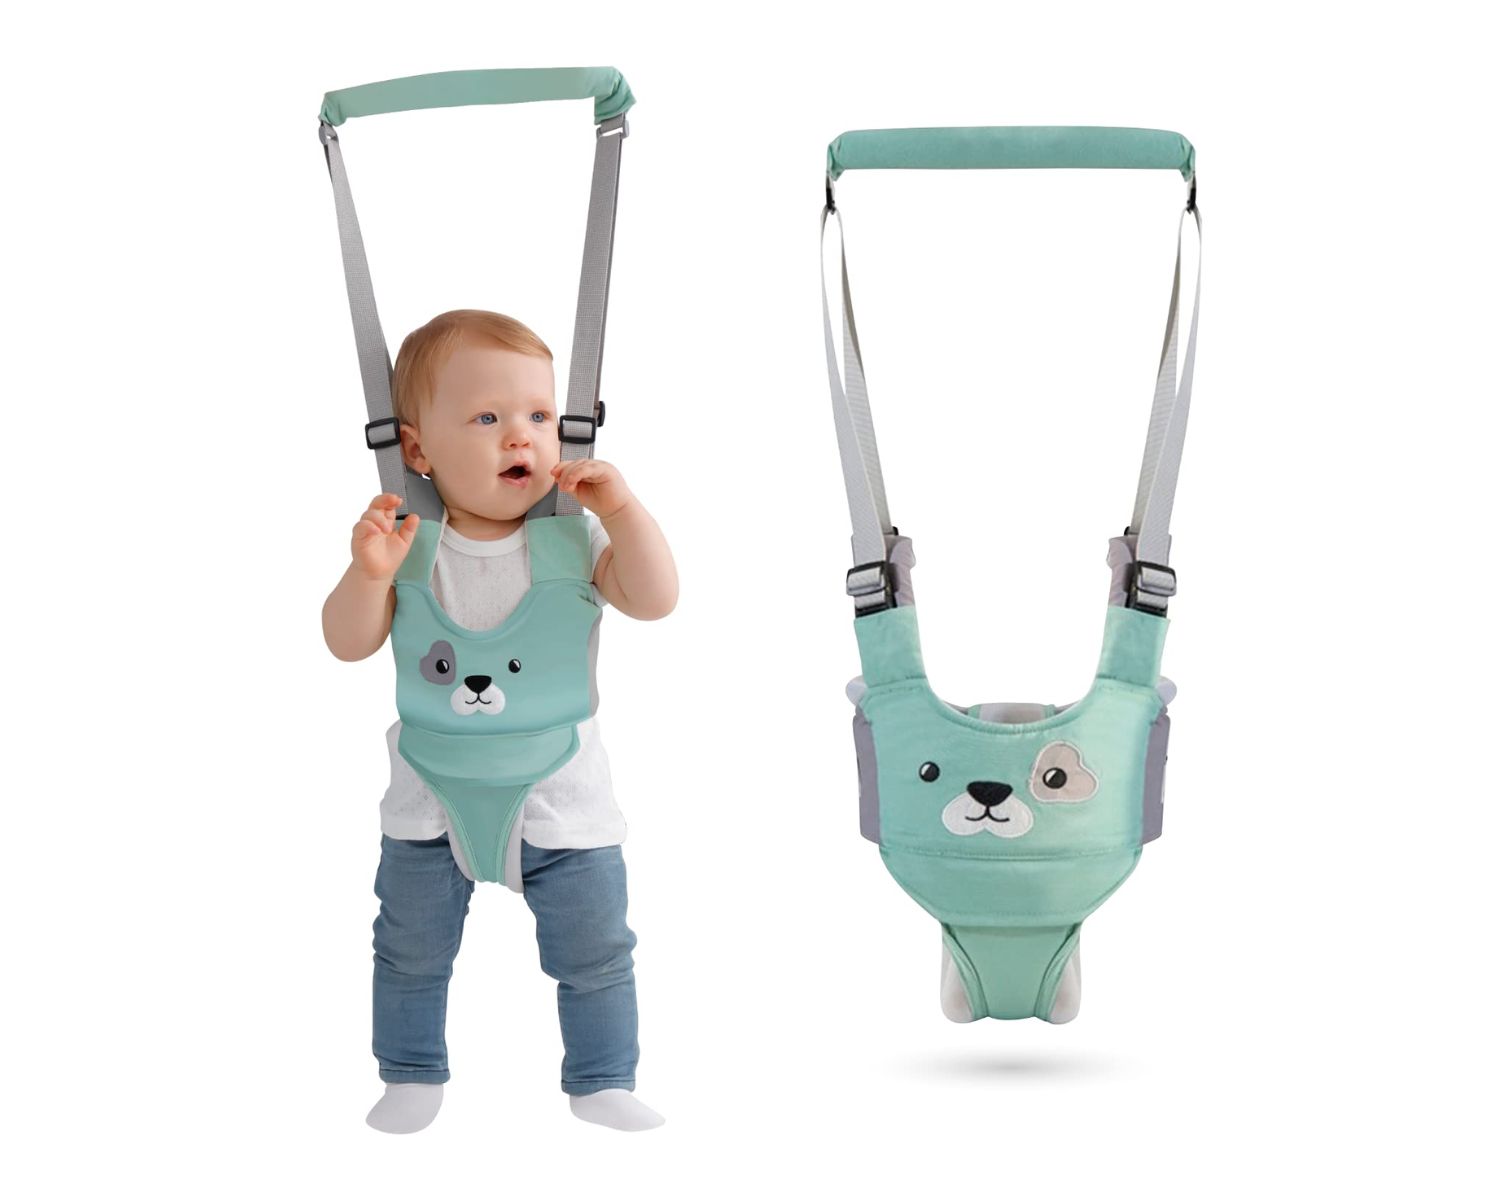 Review: Baby Walking Harness – A Must-Have for Little Explorers